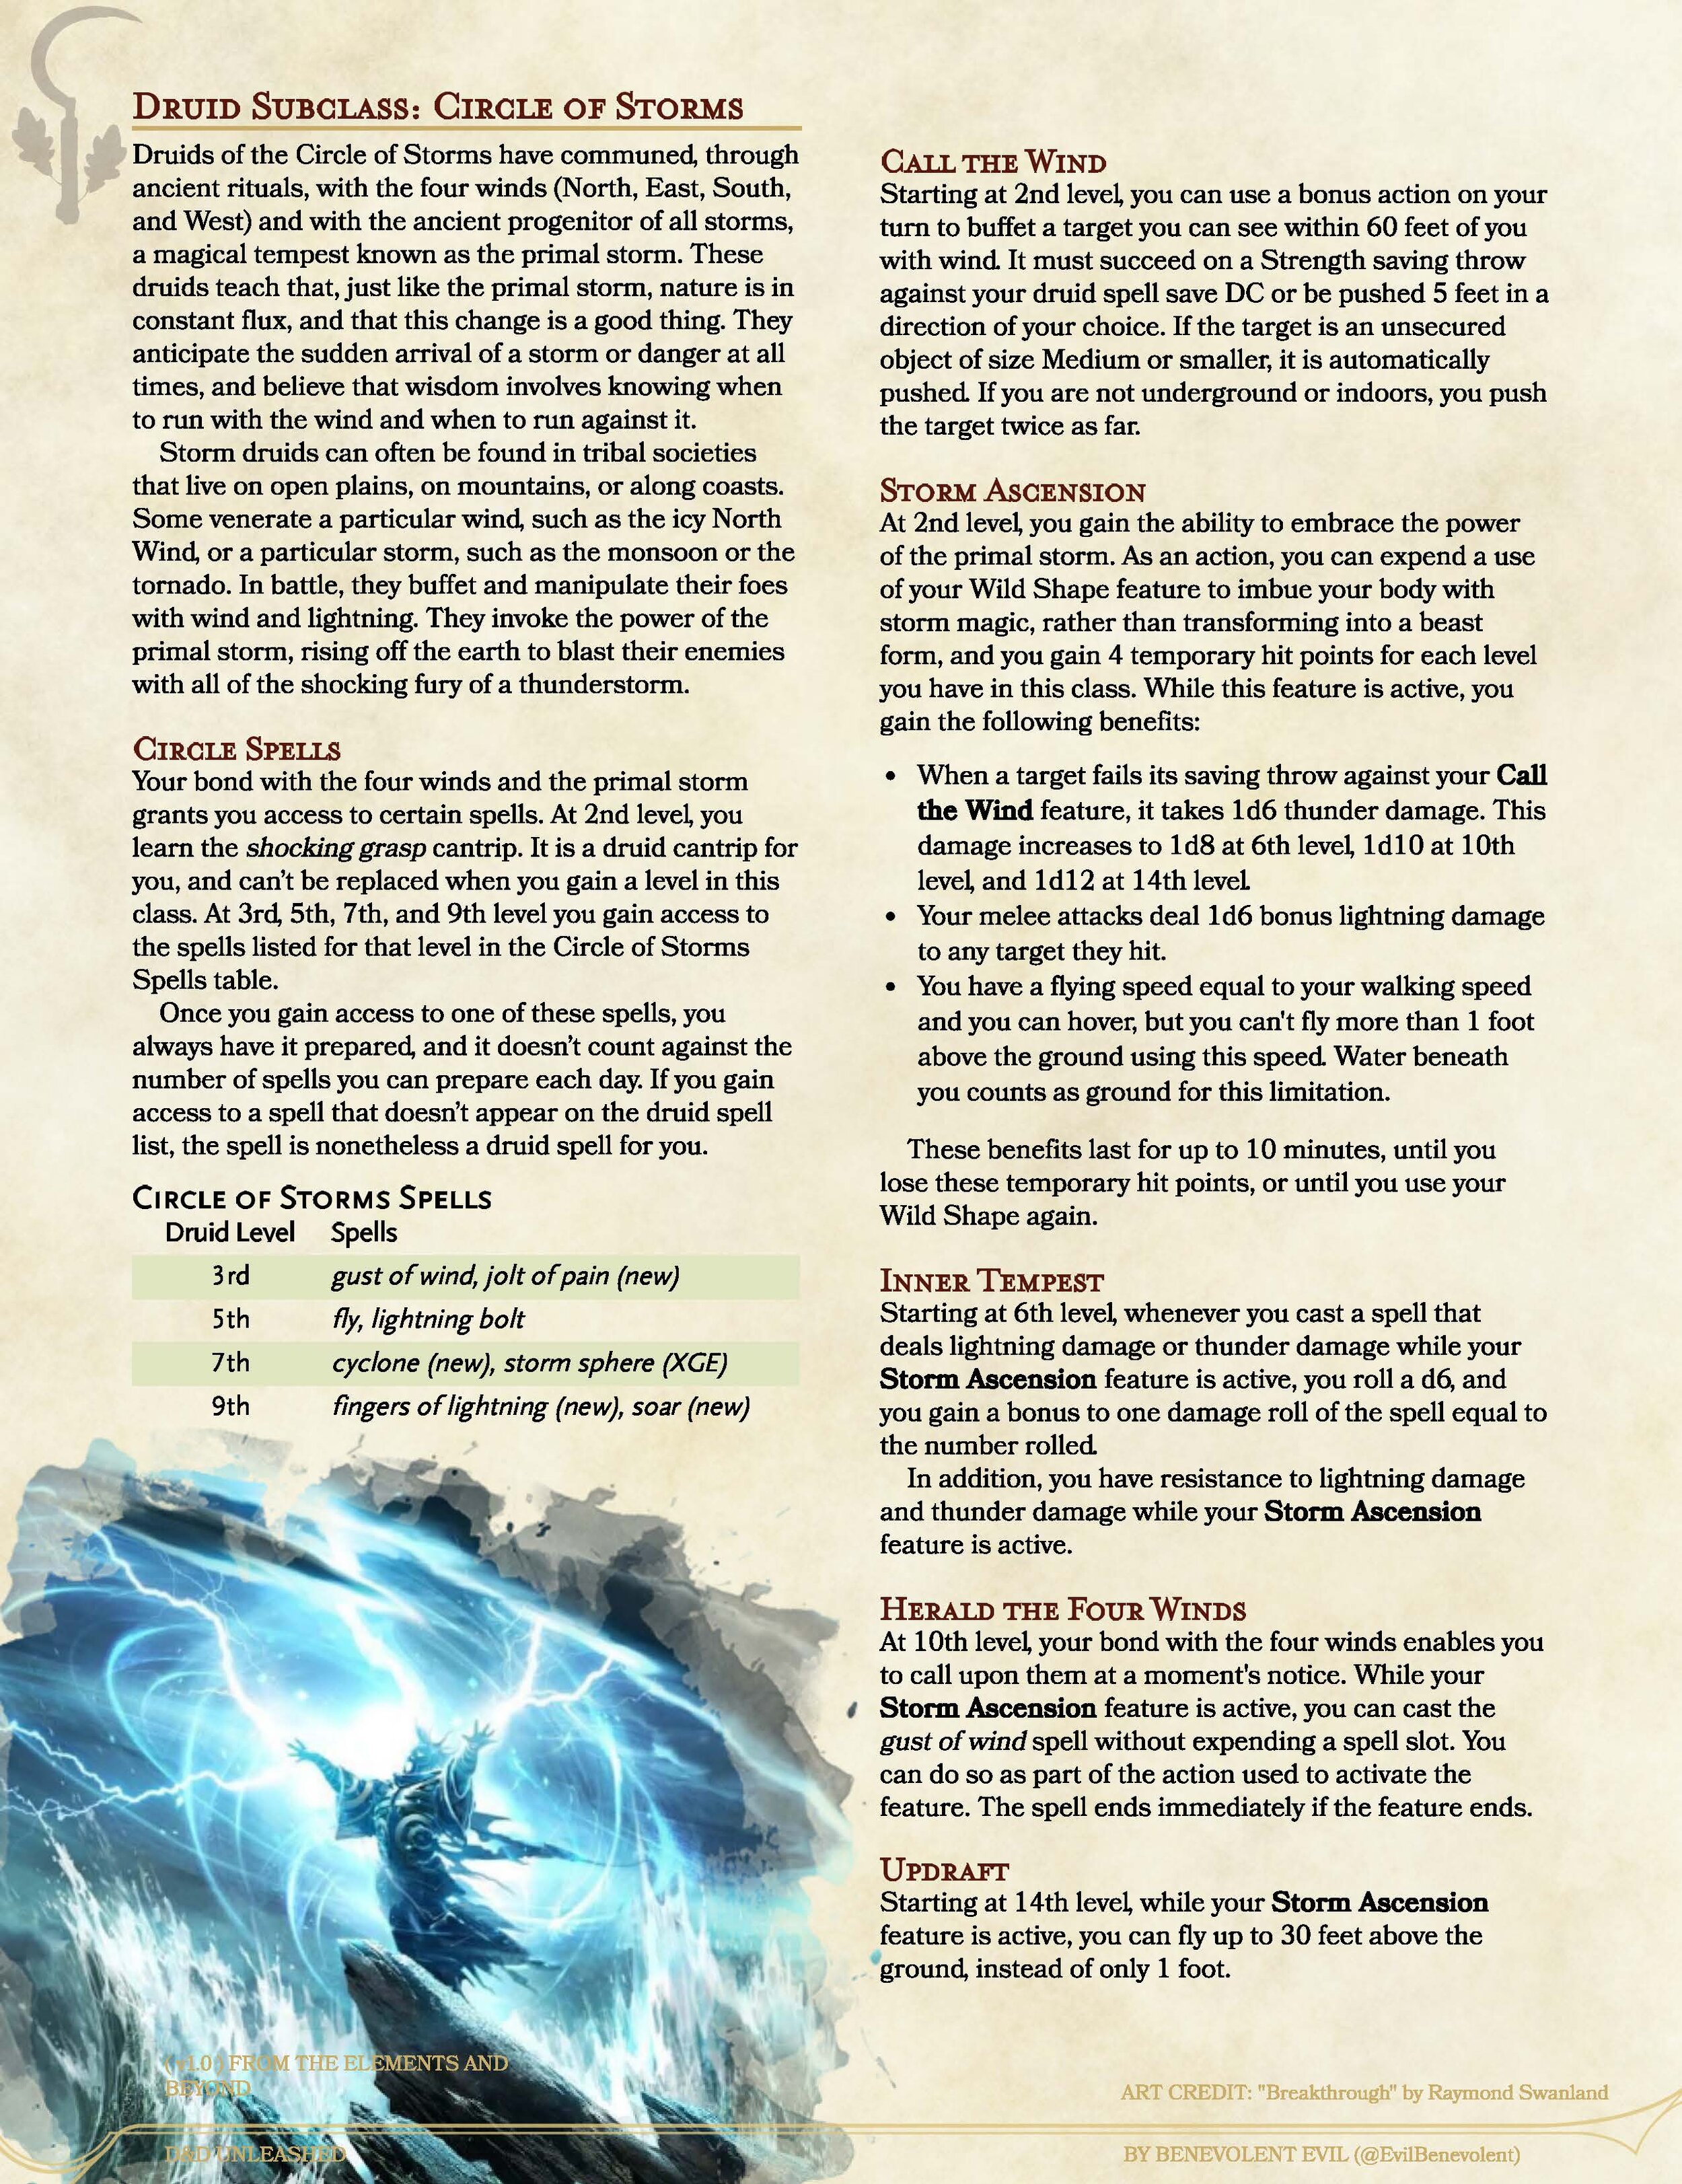 The Circle of Storms (Druid) — DND Unleashed: A Homebrew Expansion 5th Edition Dungeons and Dragons